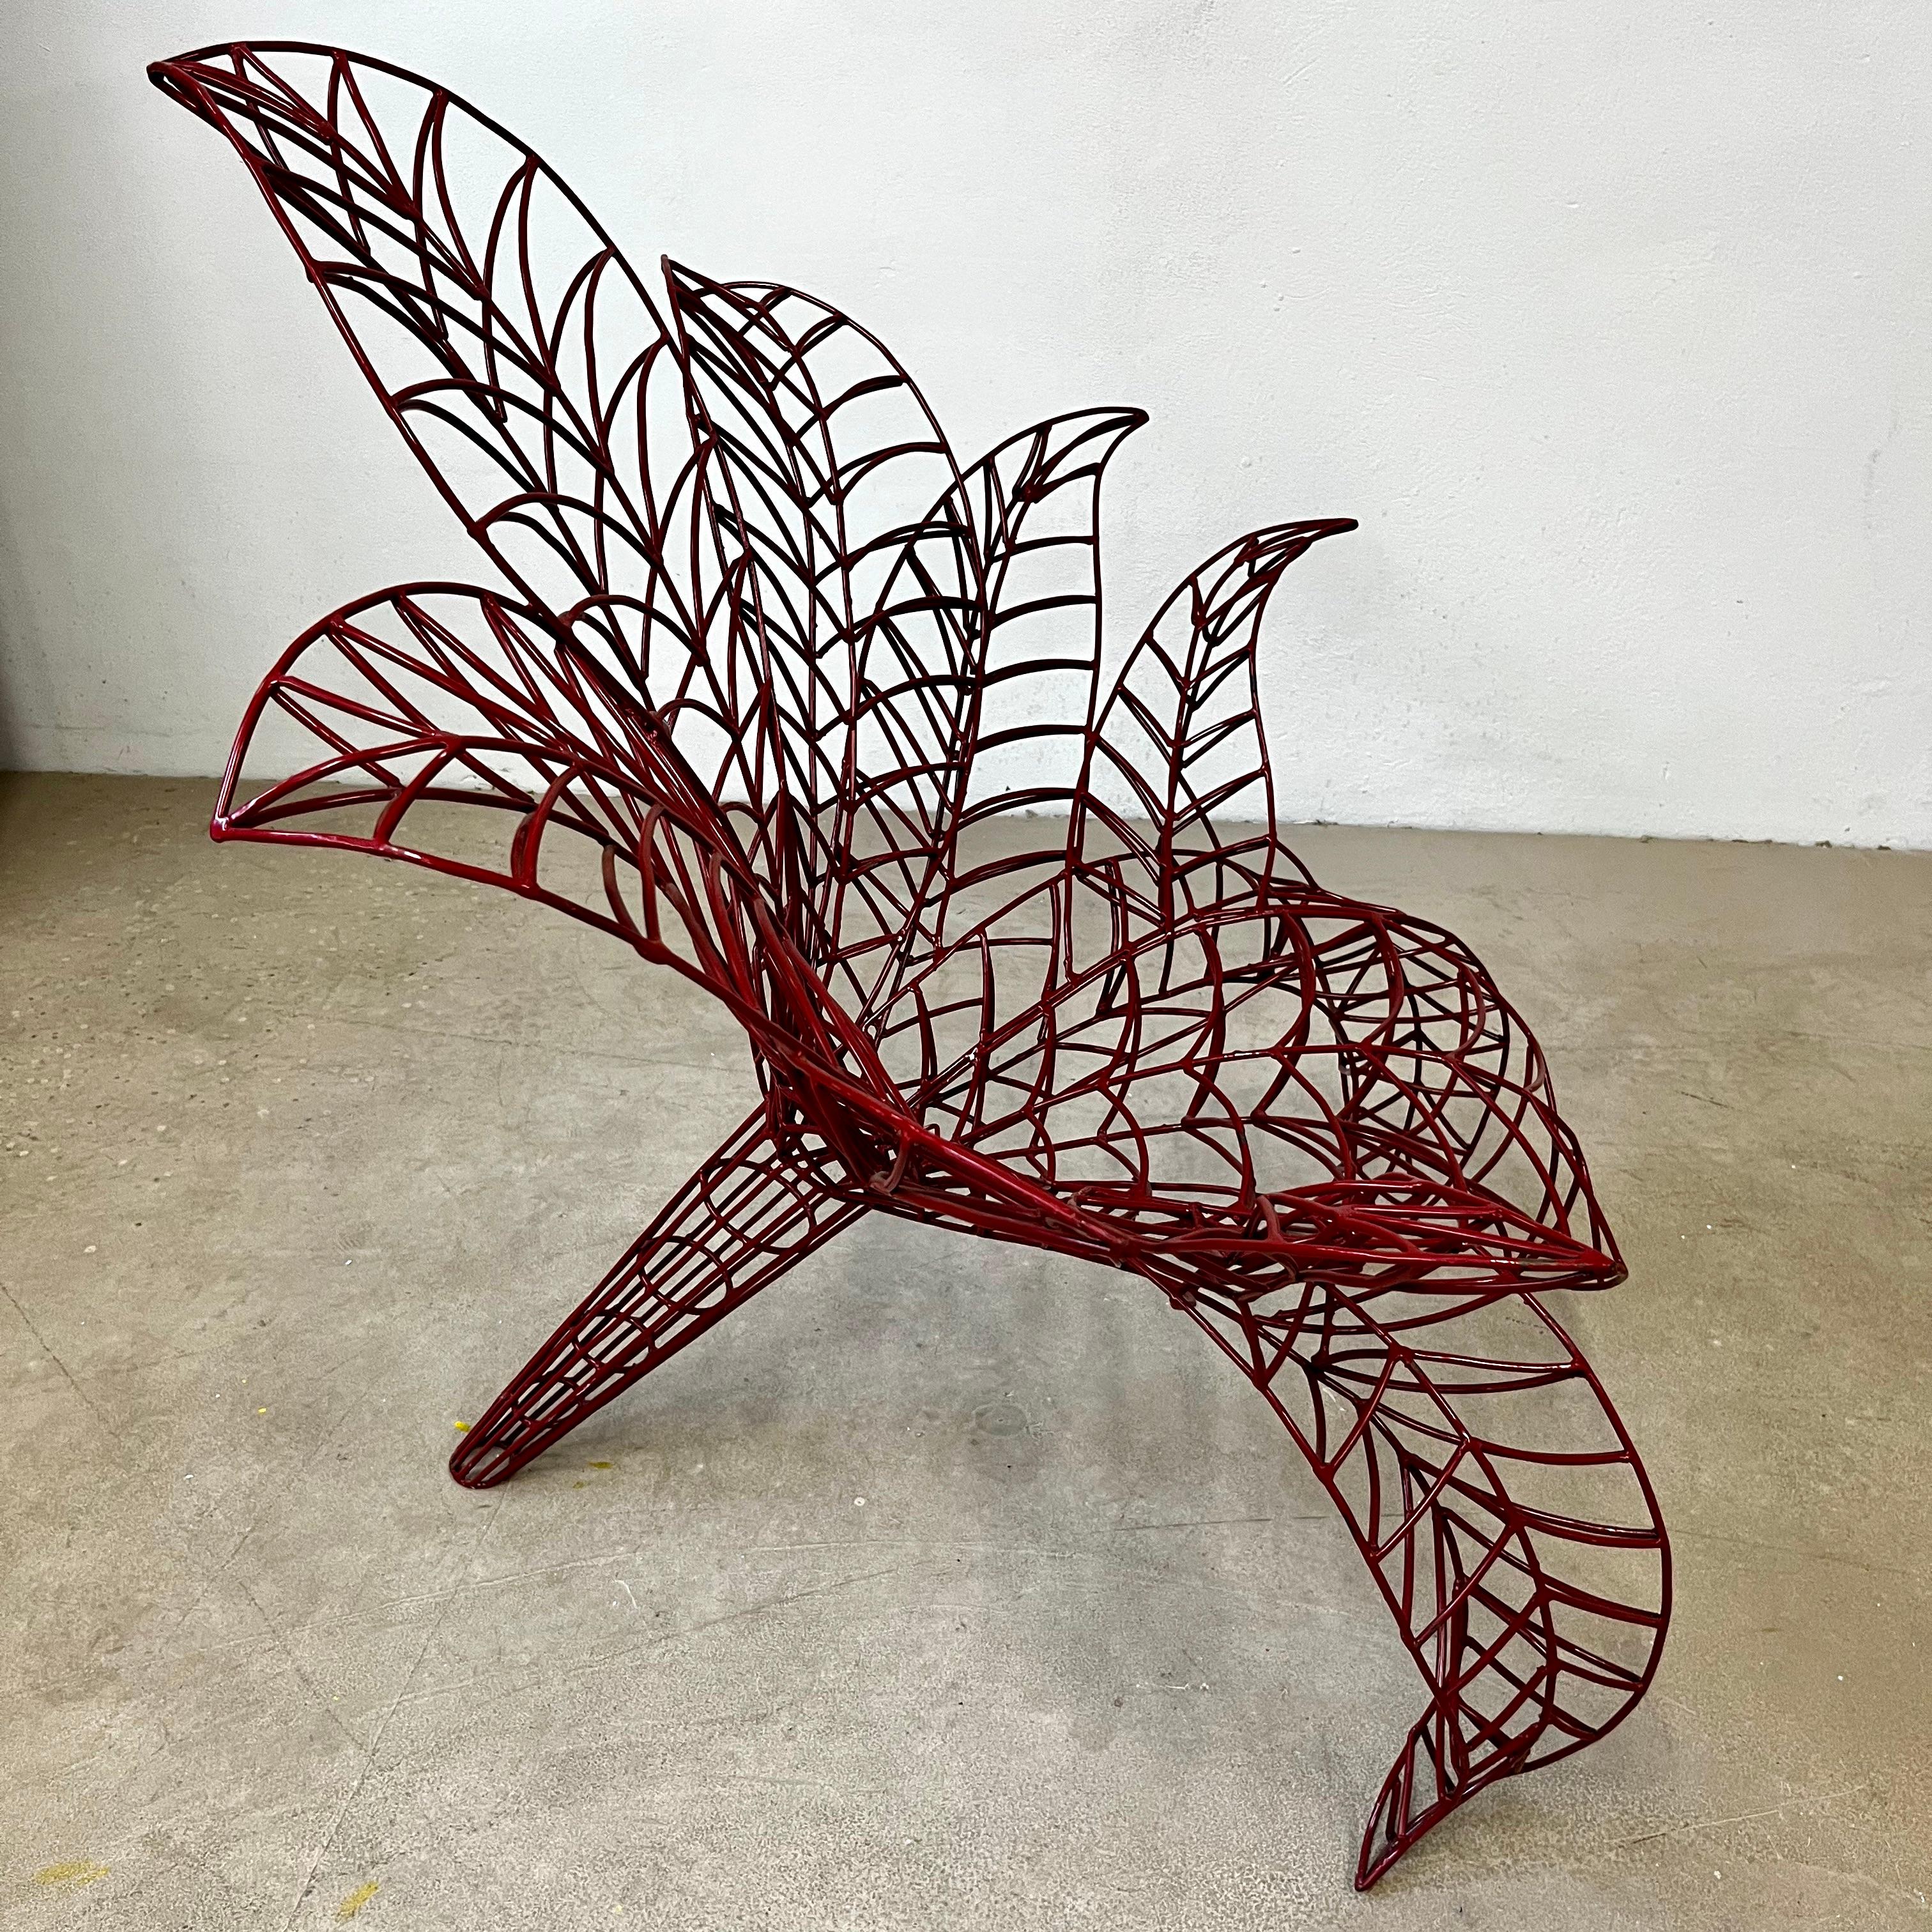 Spazzapan Italian Post-Modern Pop Art Bordeaux Flower Metal Sculpture Armchair In Good Condition For Sale In New York, NY